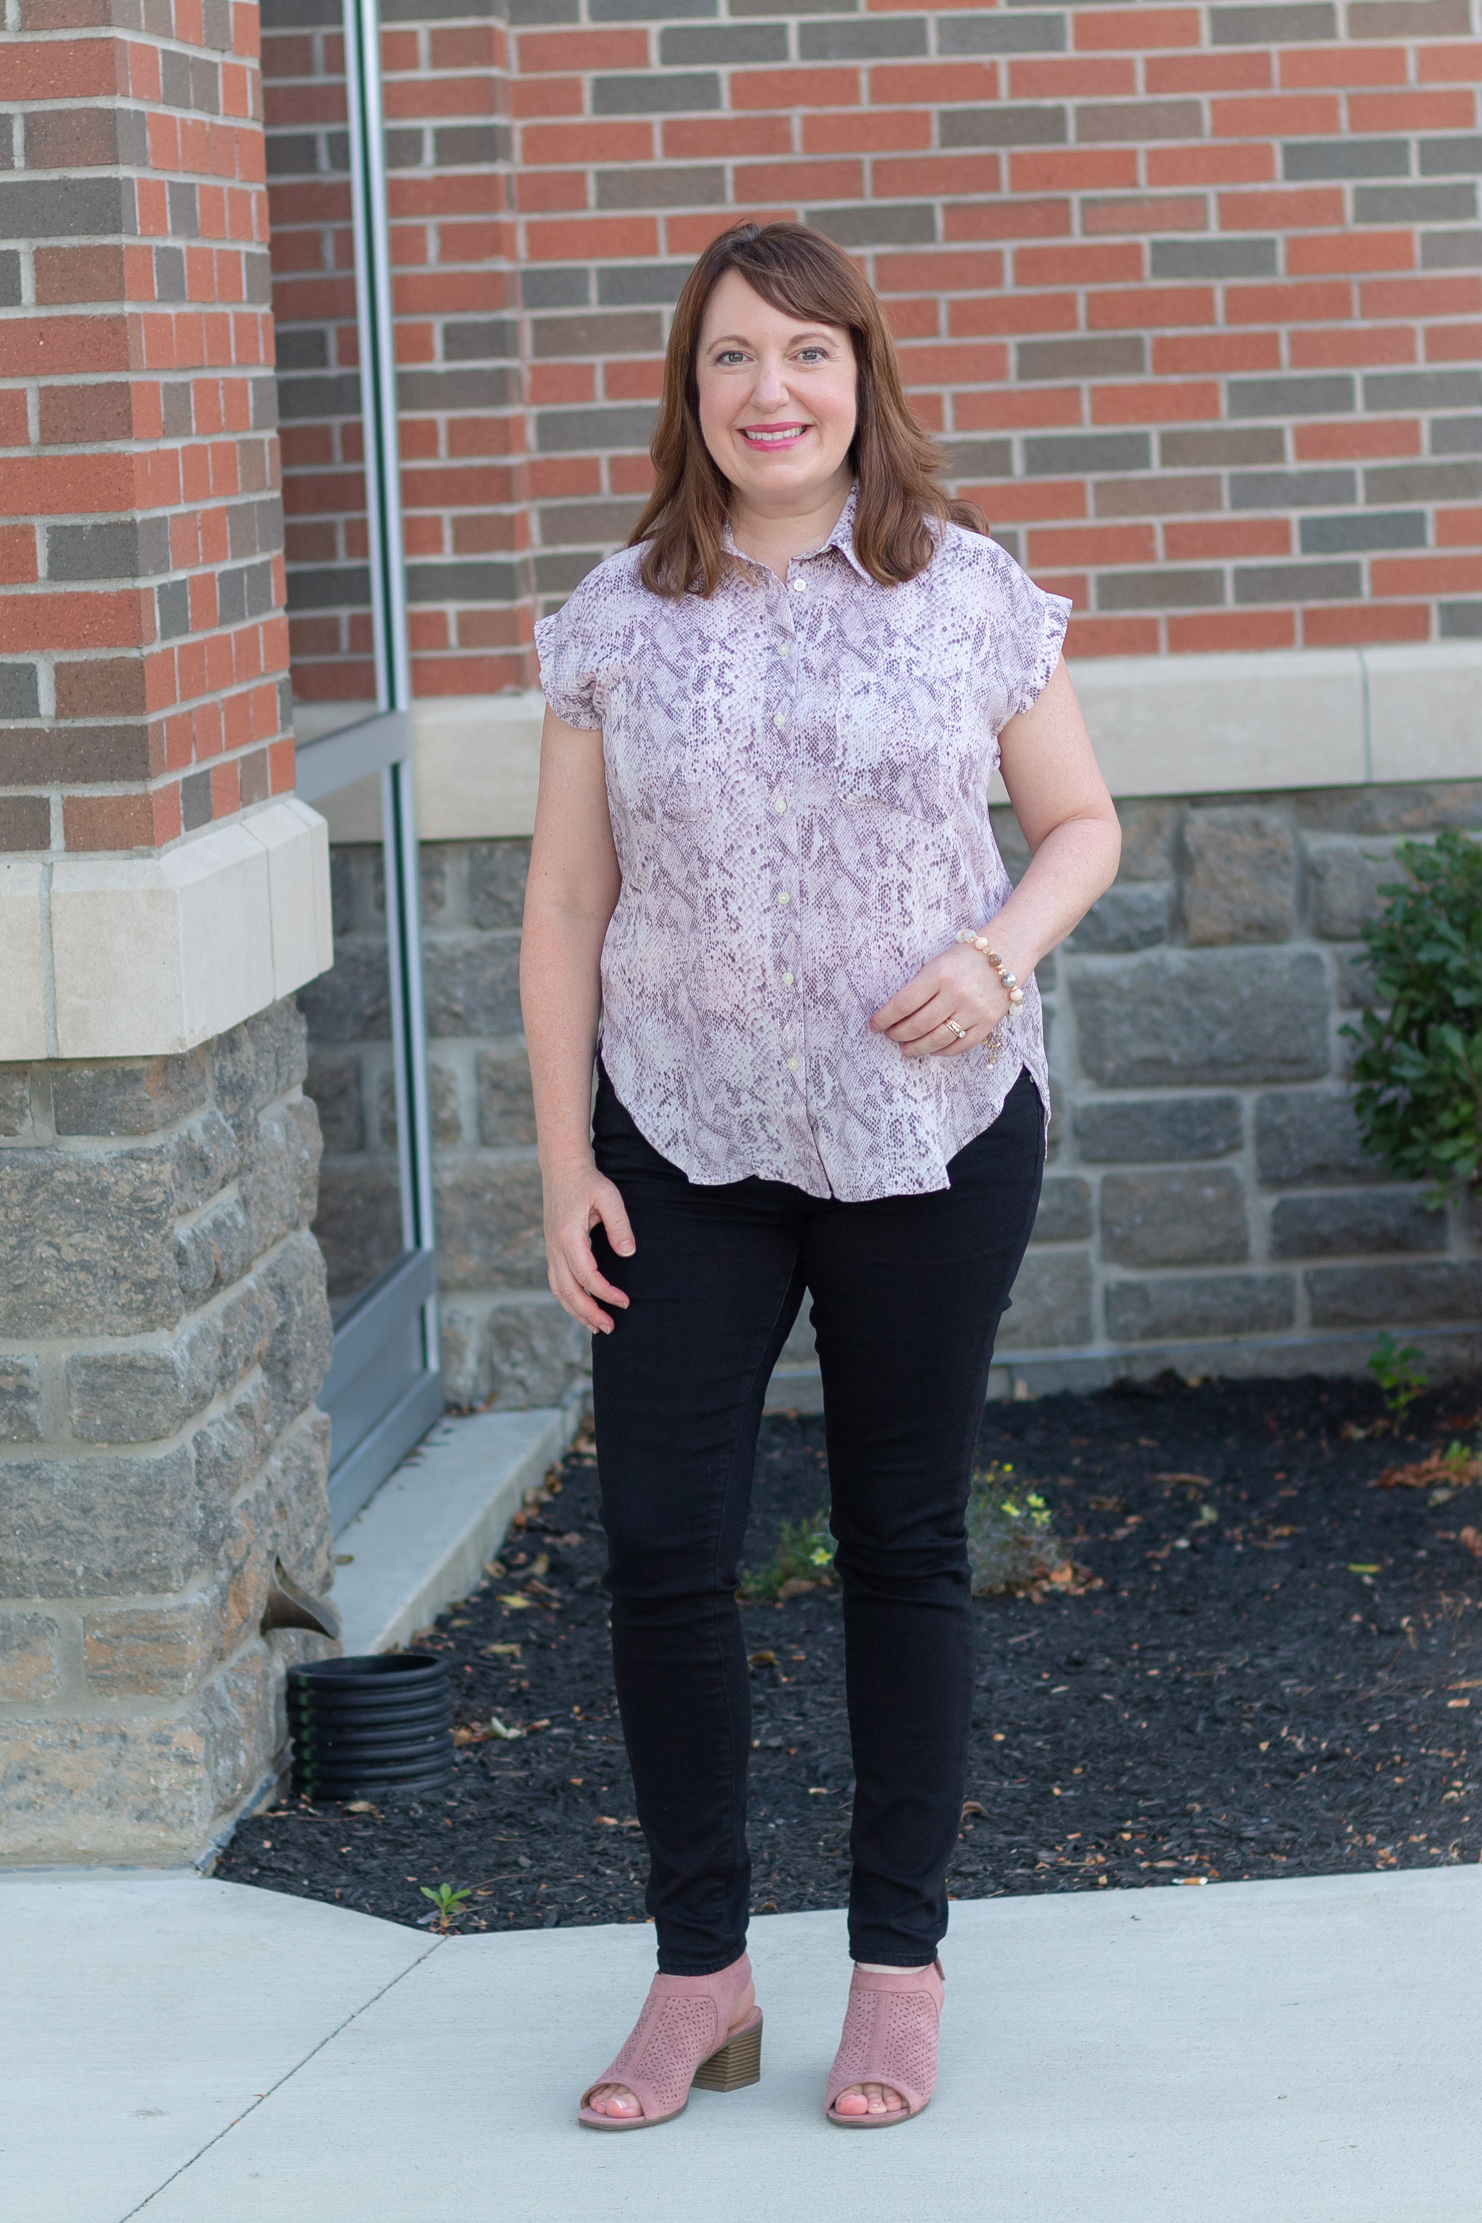 Fall Outfit Featuring Snakeskin Top